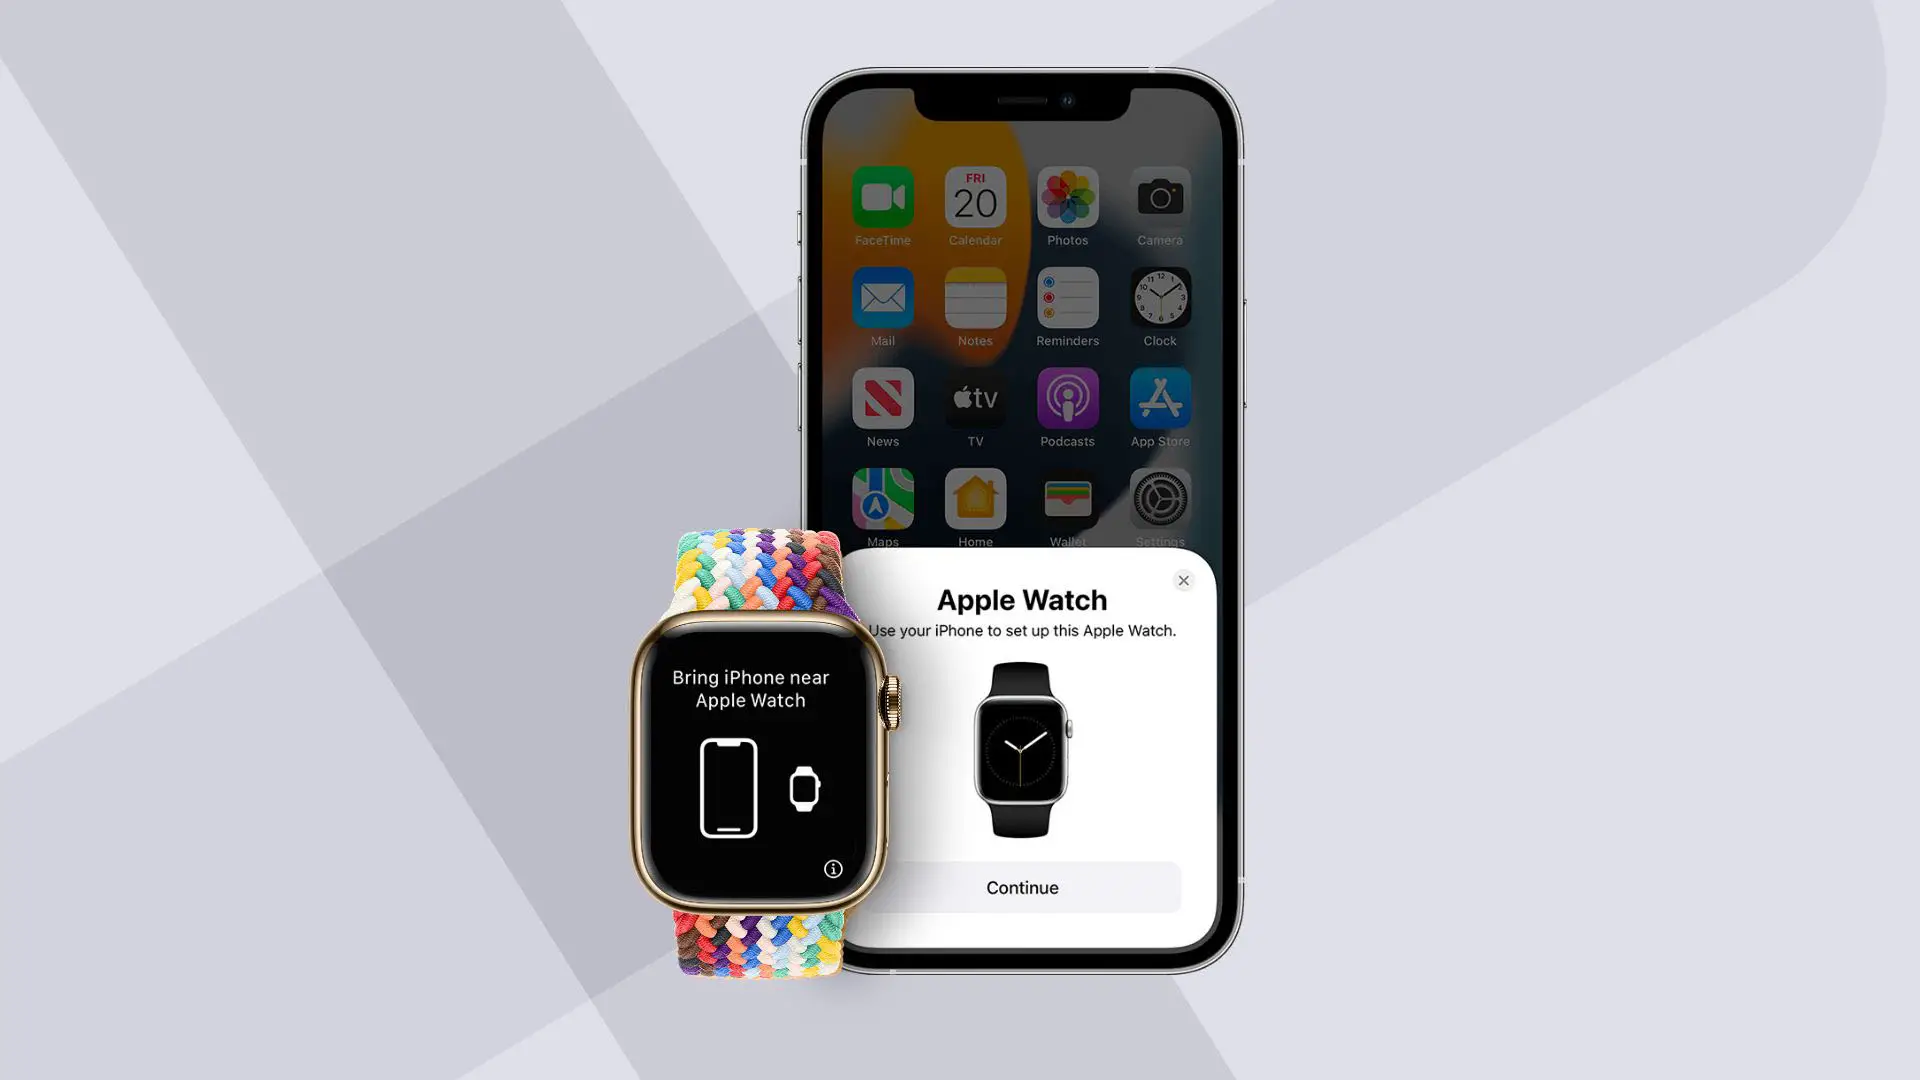 Show I icon on the Apple Watch